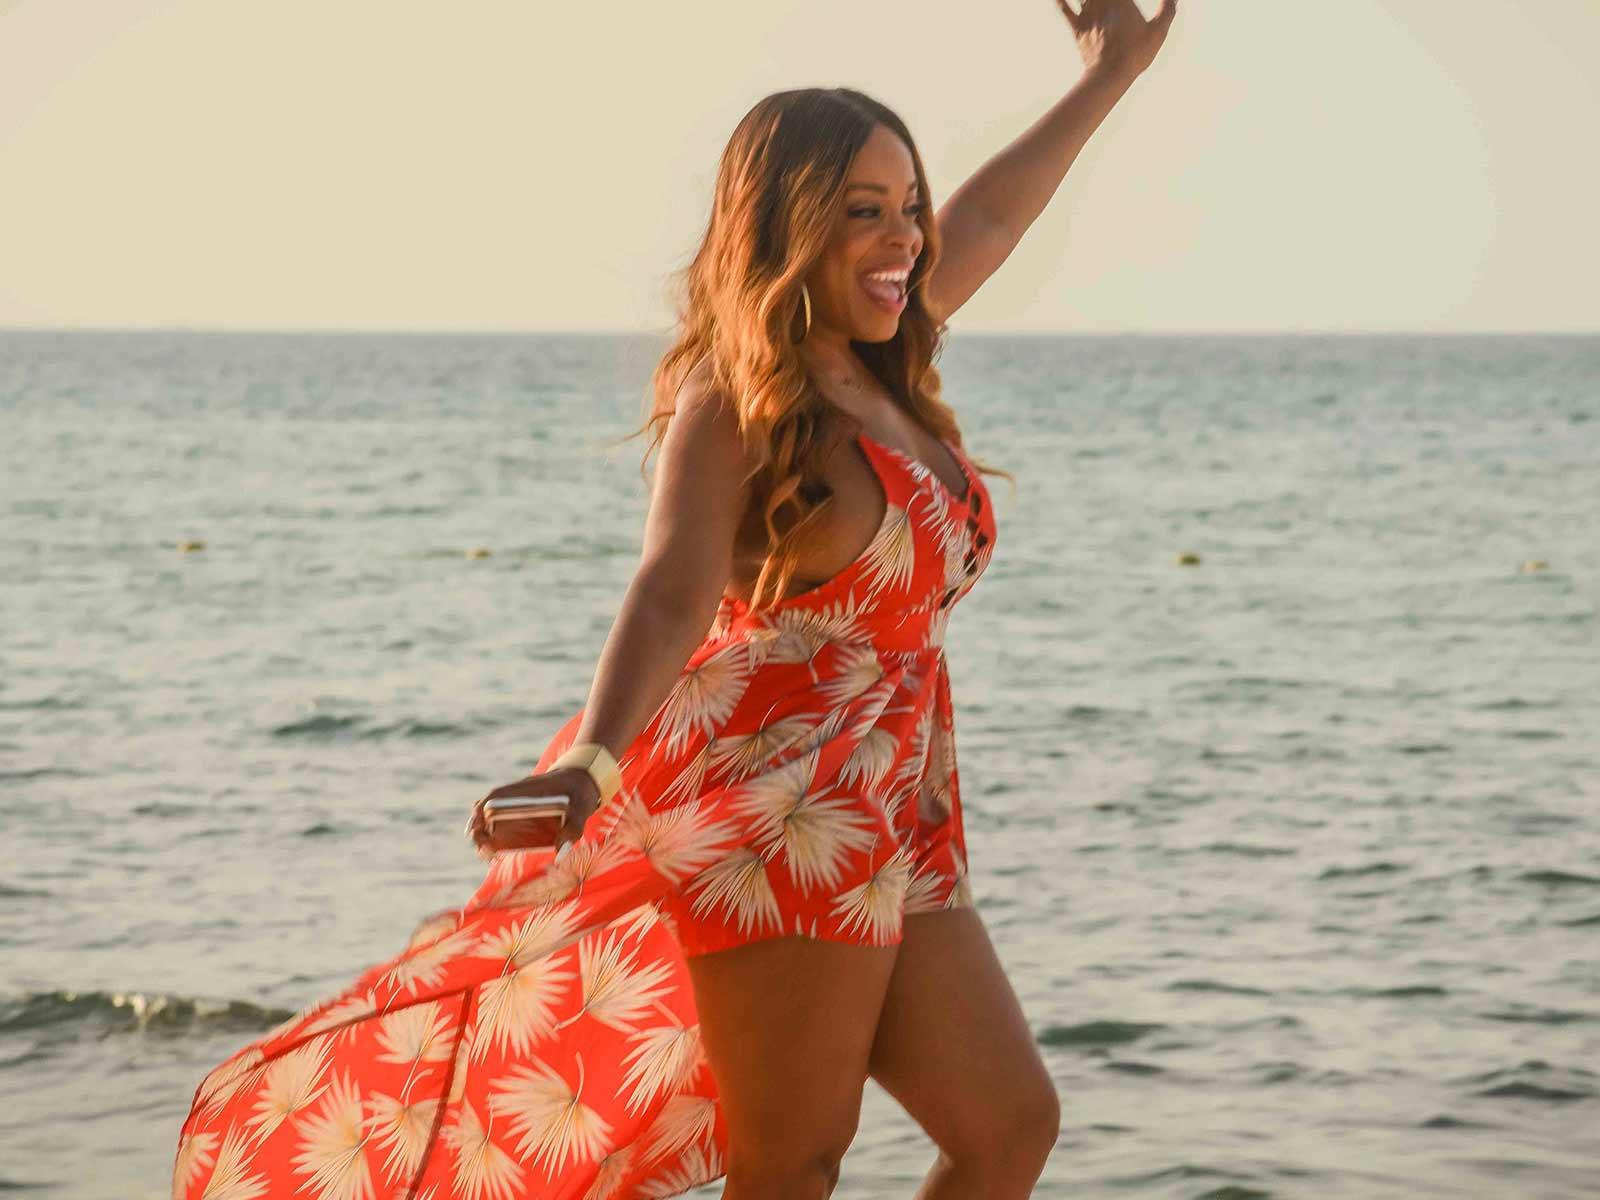 Niecy Nash Sinks Her Claws Into Summer Vacation in Mexico